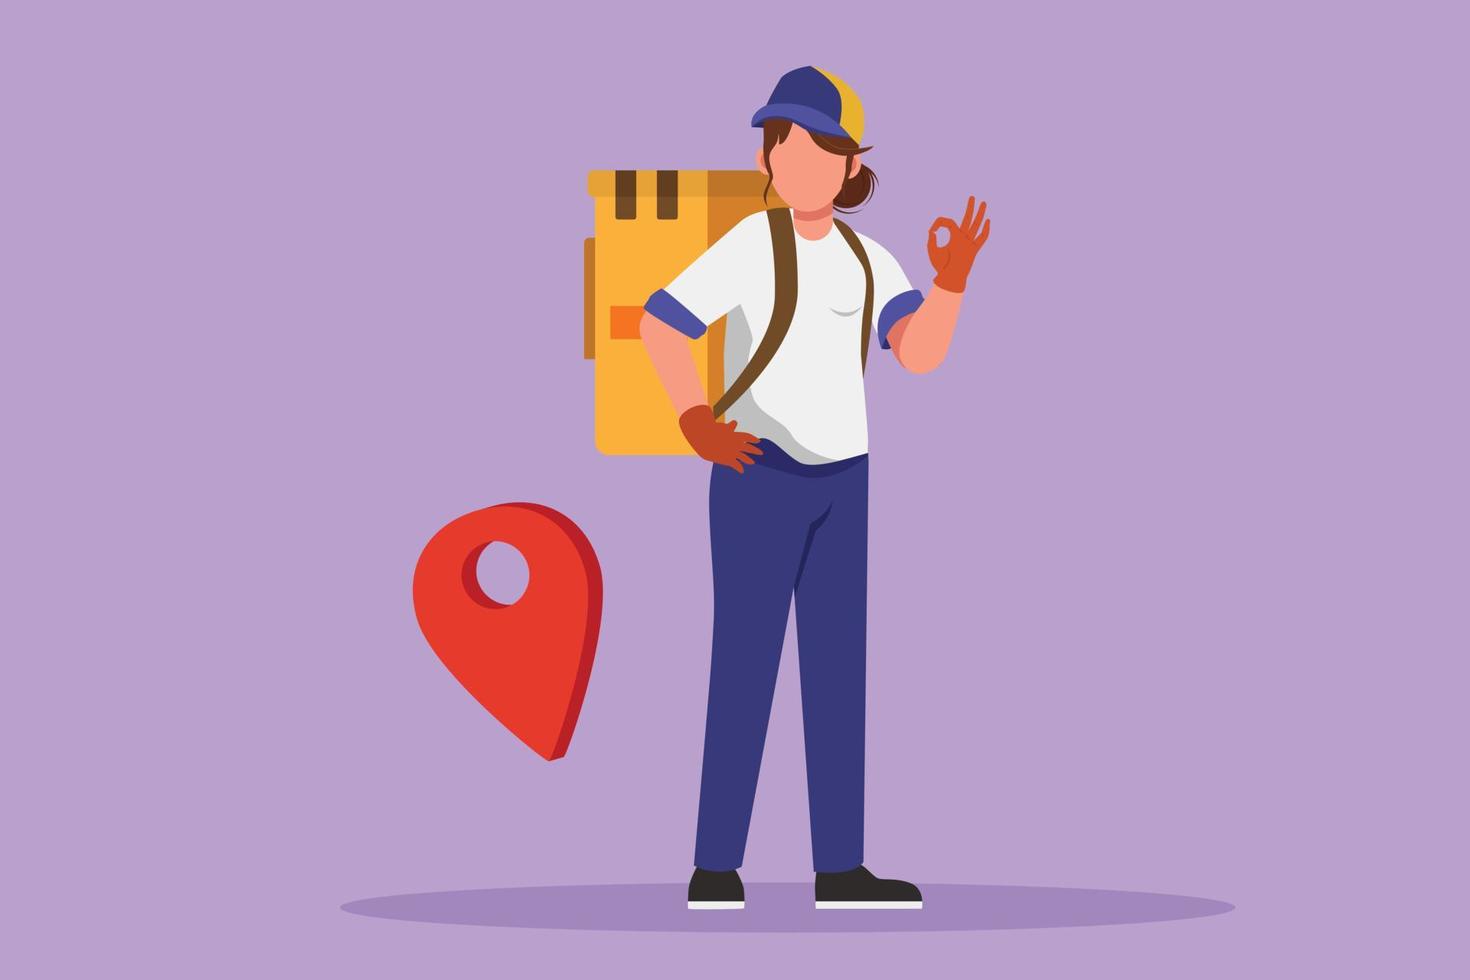 Cartoon flat style drawing delivery woman standing with okay gesture and pin map symbol. Carrying package box that the customer has ordered to be delivered safely. Graphic design vector illustration